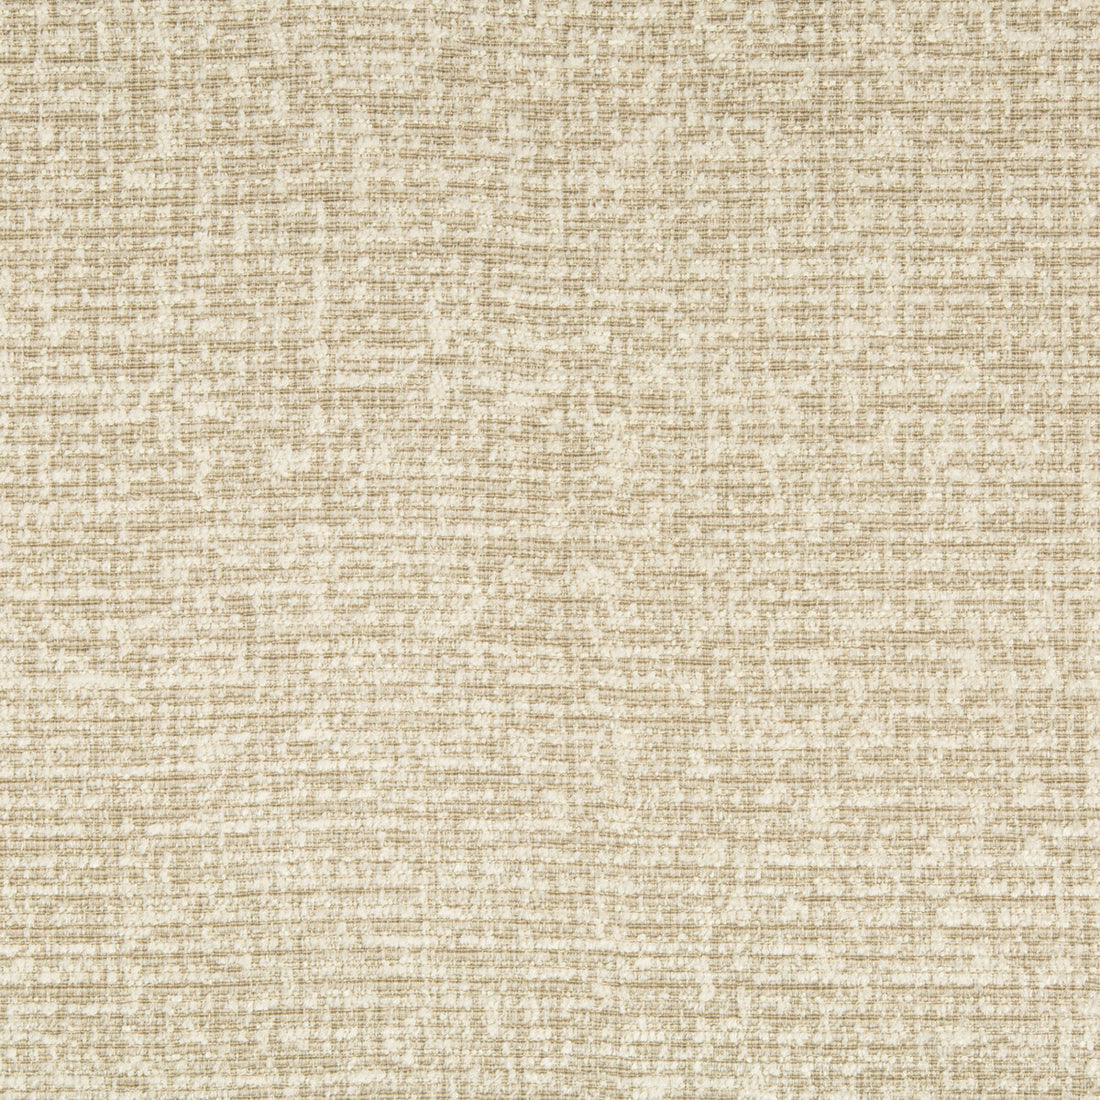 Kravet Design fabric in 35005-16 color - pattern 35005.16.0 - by Kravet Design in the Performance Crypton Home collection